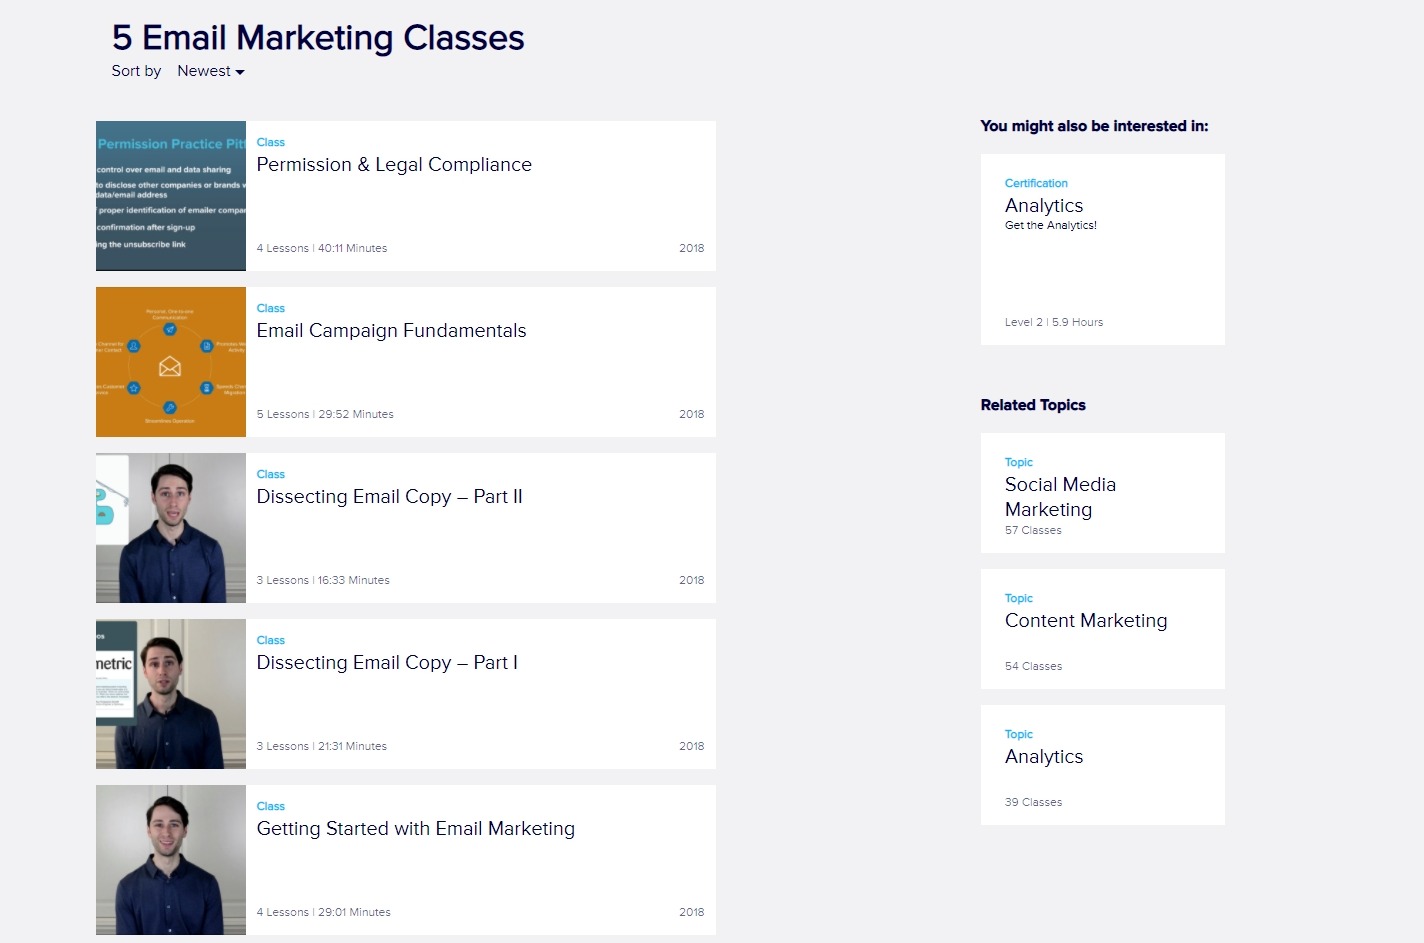 Email Campaign Fundamentals from Online Marketing Institute